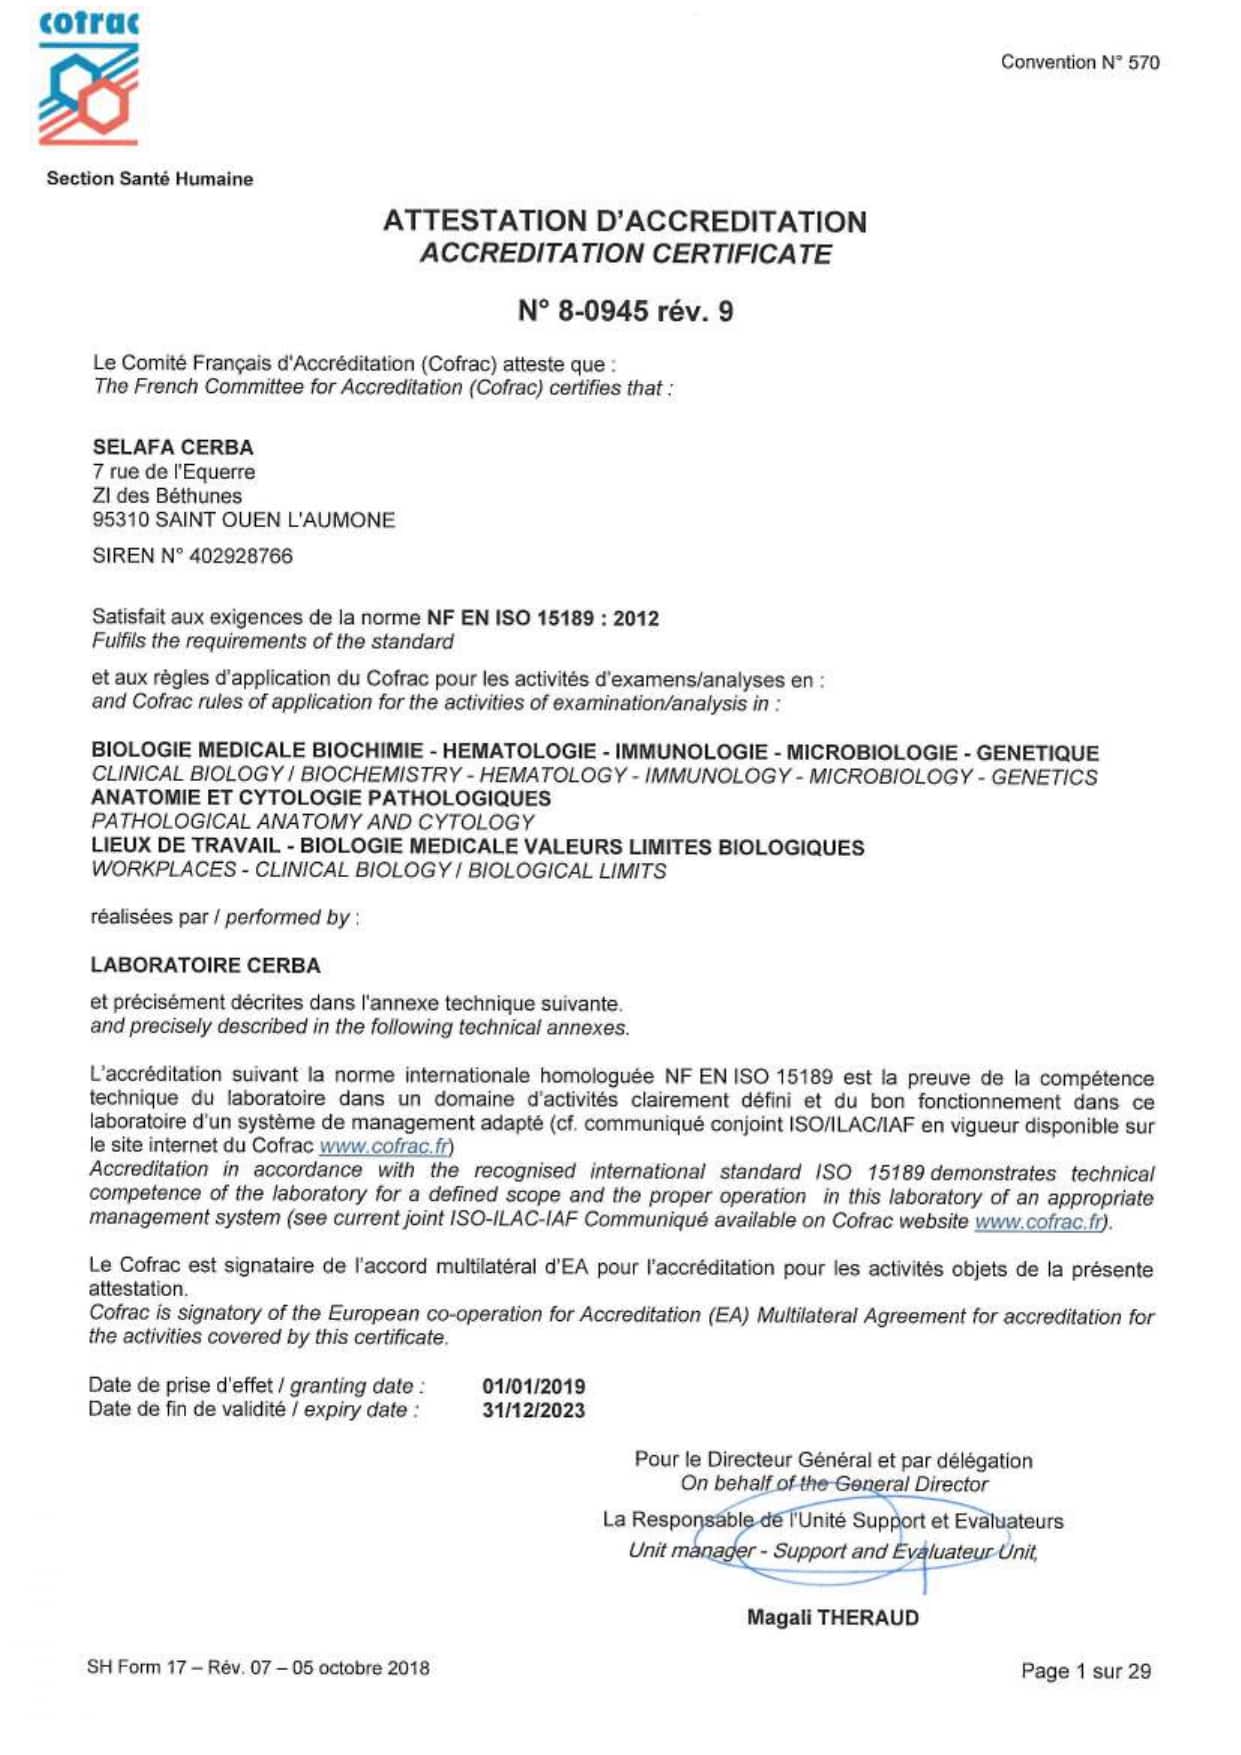 Cerba Research - Certification - Cofrac AccreditationCertificate CerbaLab FR_page-0001